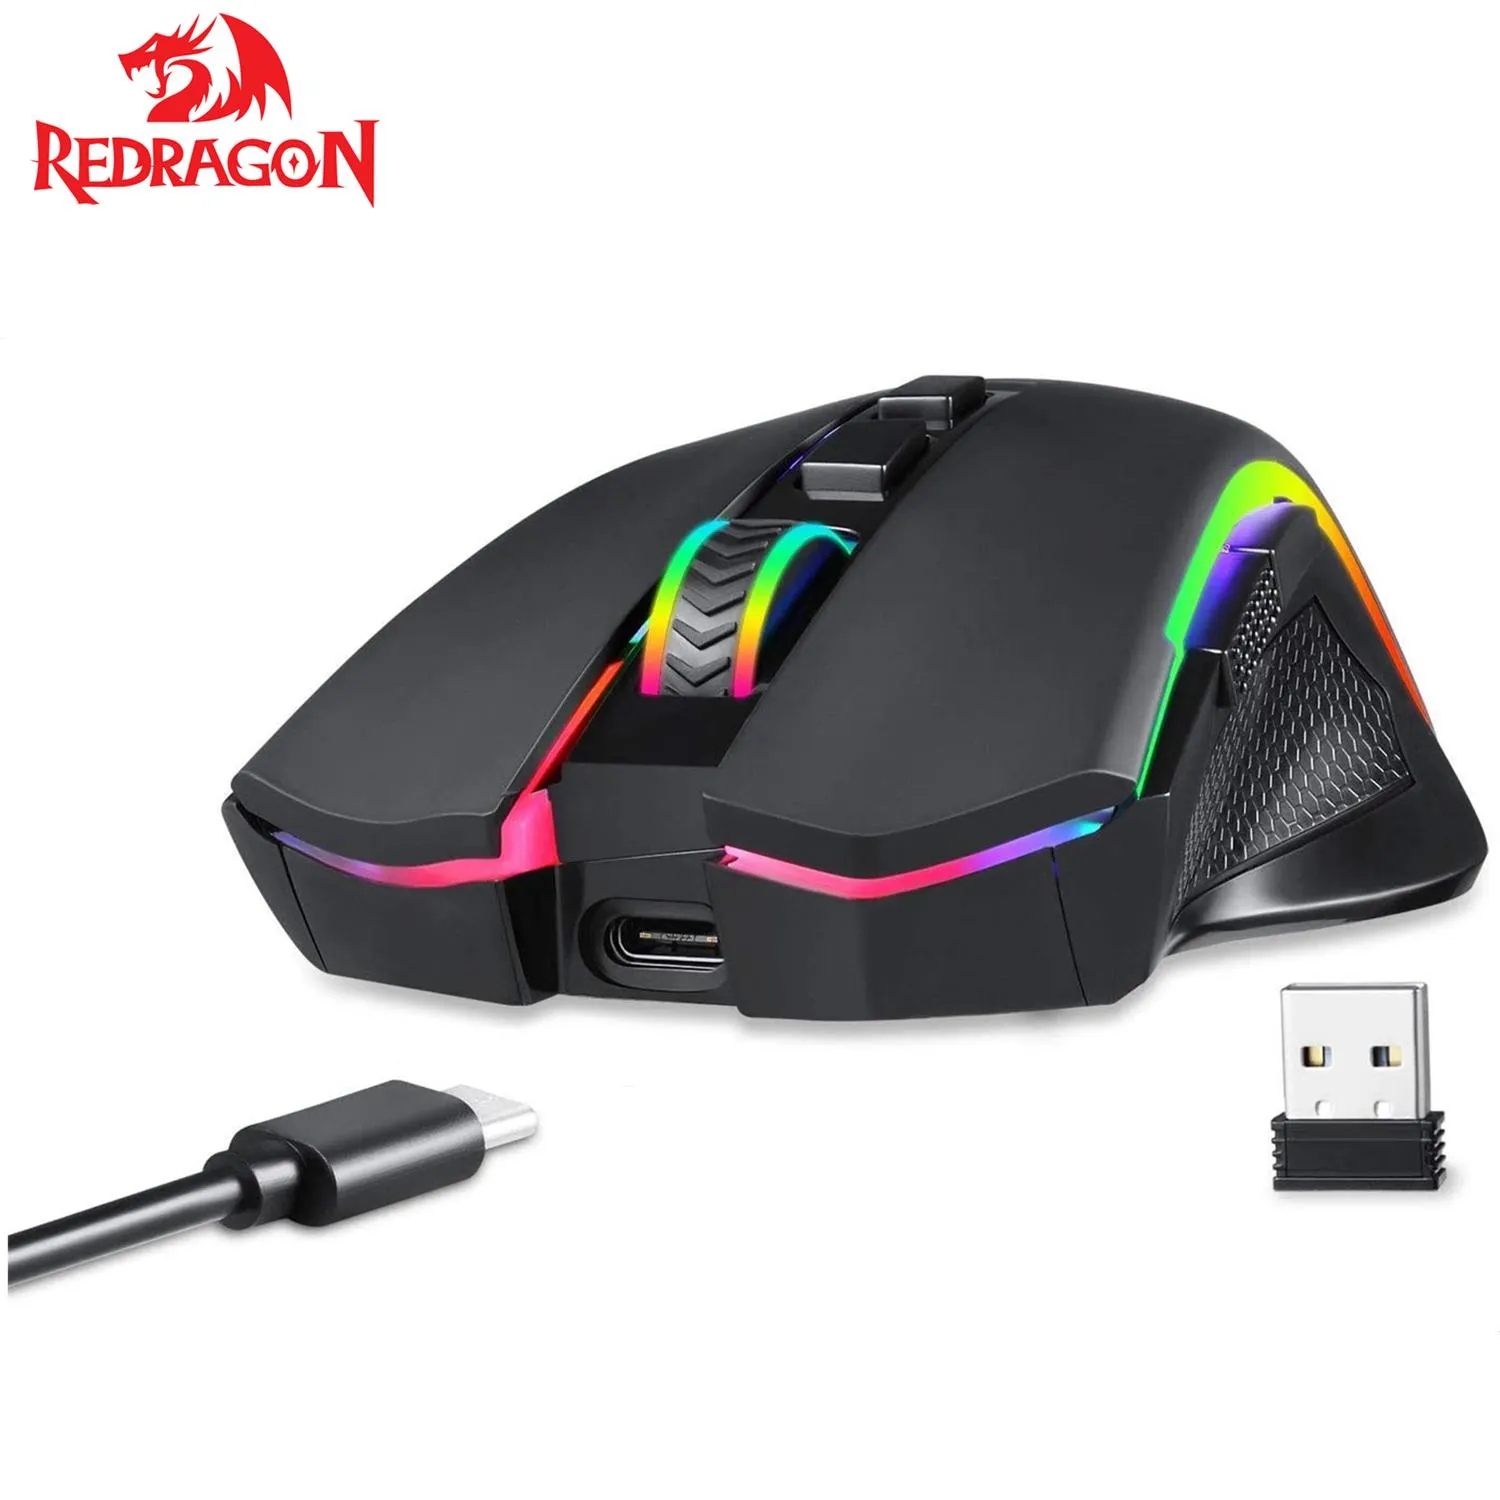 MICE REDRAGE M607KS GAMING WIRESS MONDE RV Backlit MMO 7 Boutons programmables Mouse RO enregistrement pour ordinateur portable PC Gamer